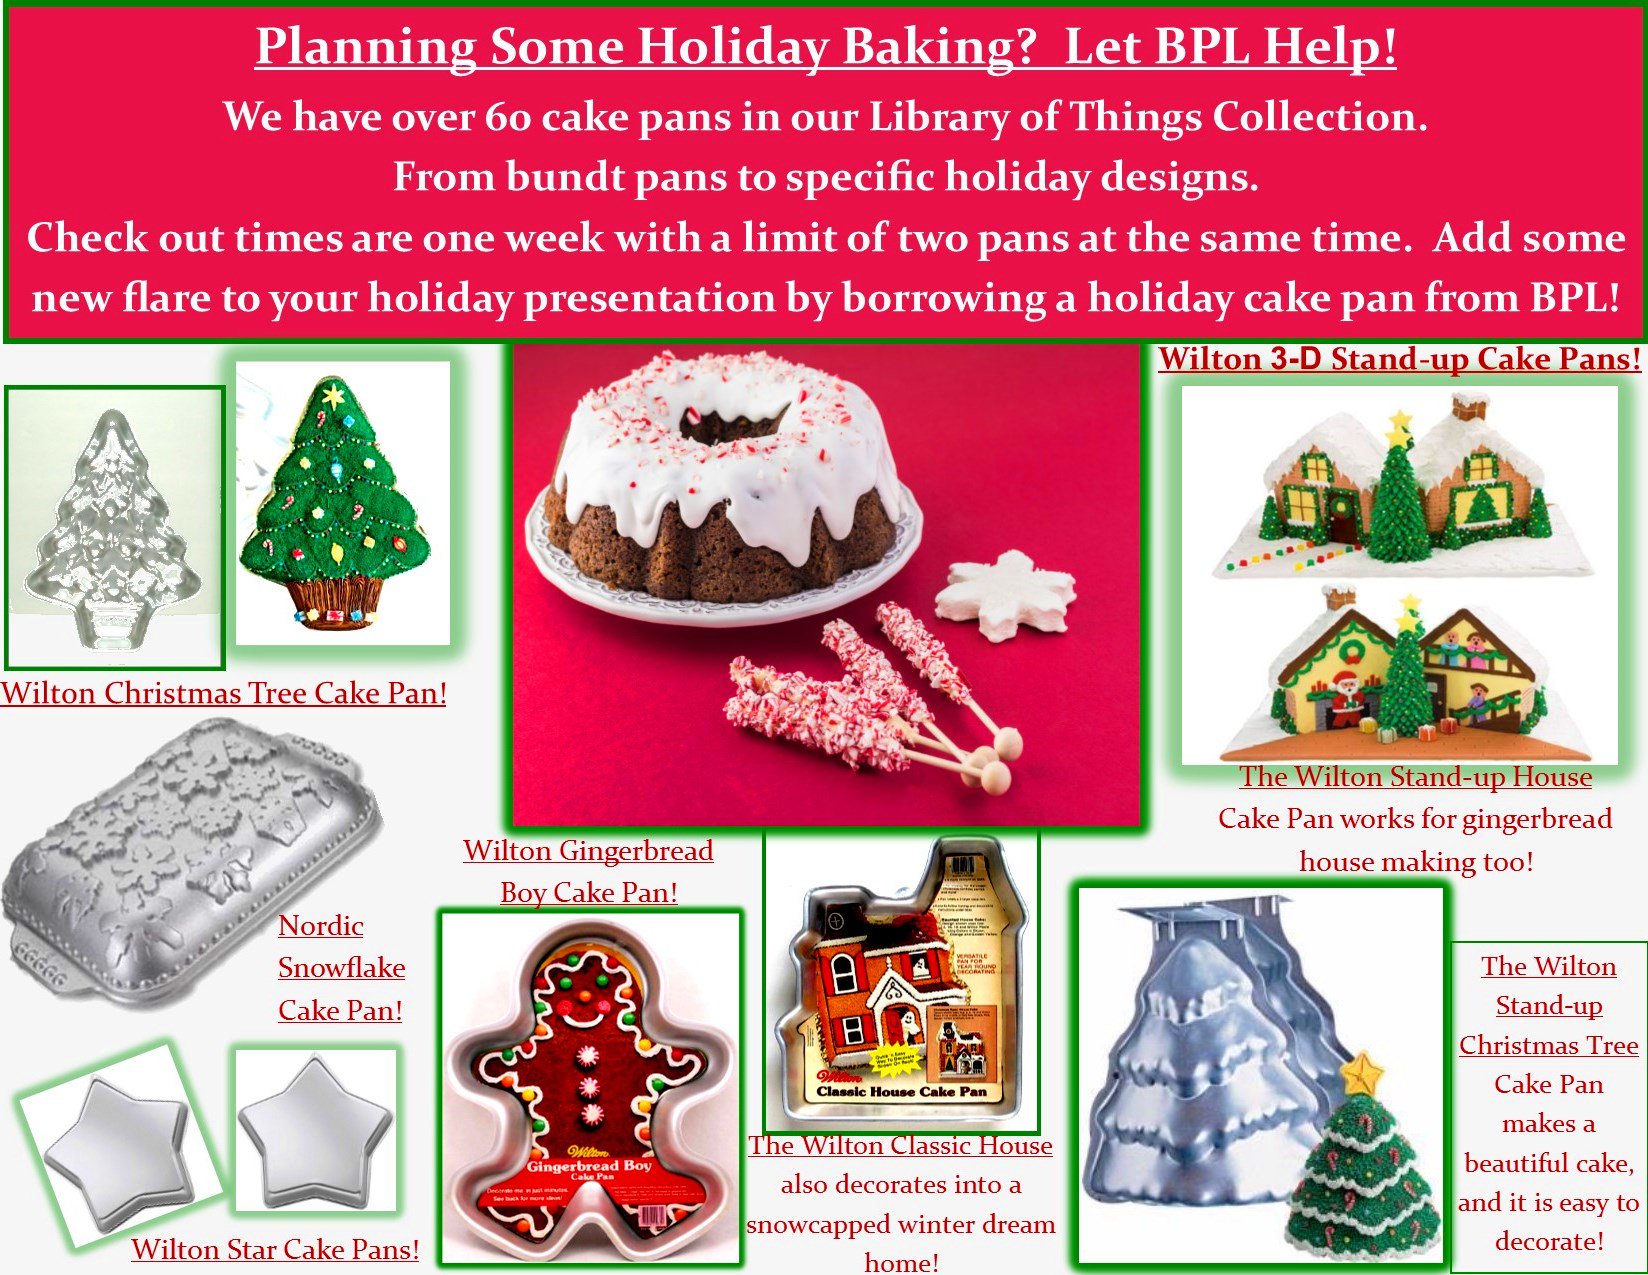 Bartlesville Public Library on X: BPL's Library of Things has Holiday Cake  Pans! 🎄 Bake something new, fun & creative this season with a wide  selection of more than 60 cake pans.